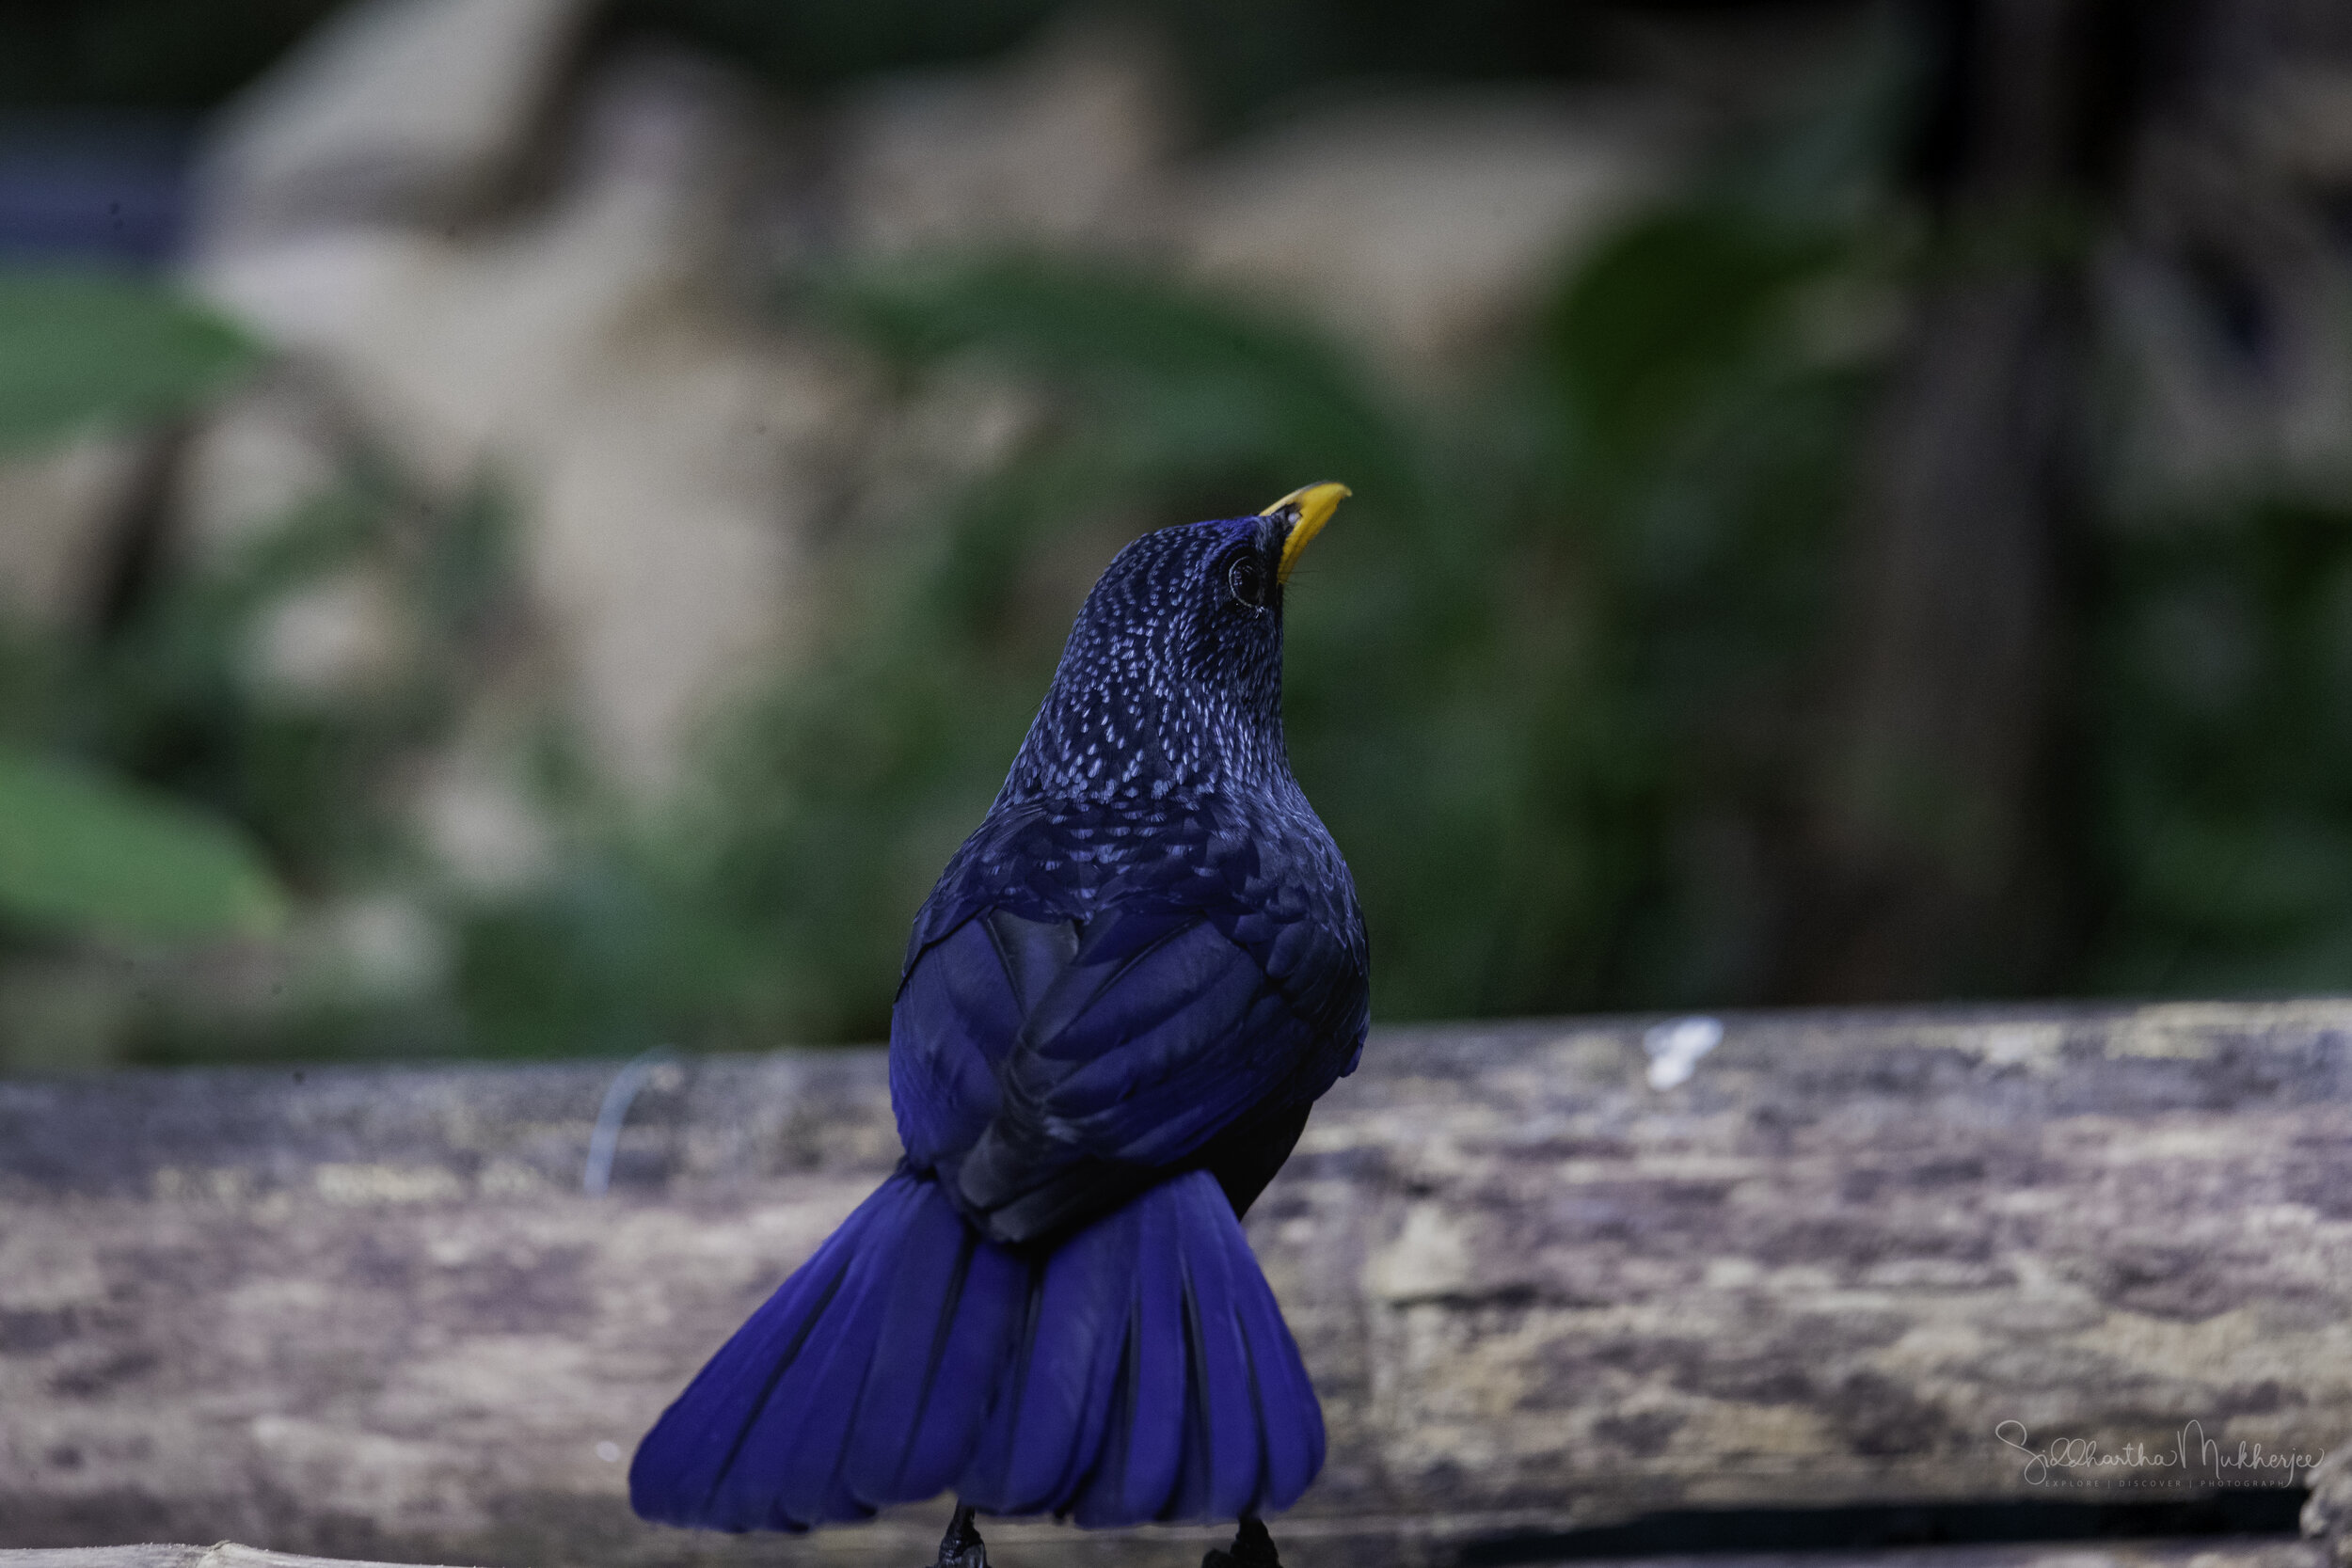   Blue Whistling Thrush  (yellow billed nominate)  Click on the photo to read about the whistling schoolboy of the forests.  